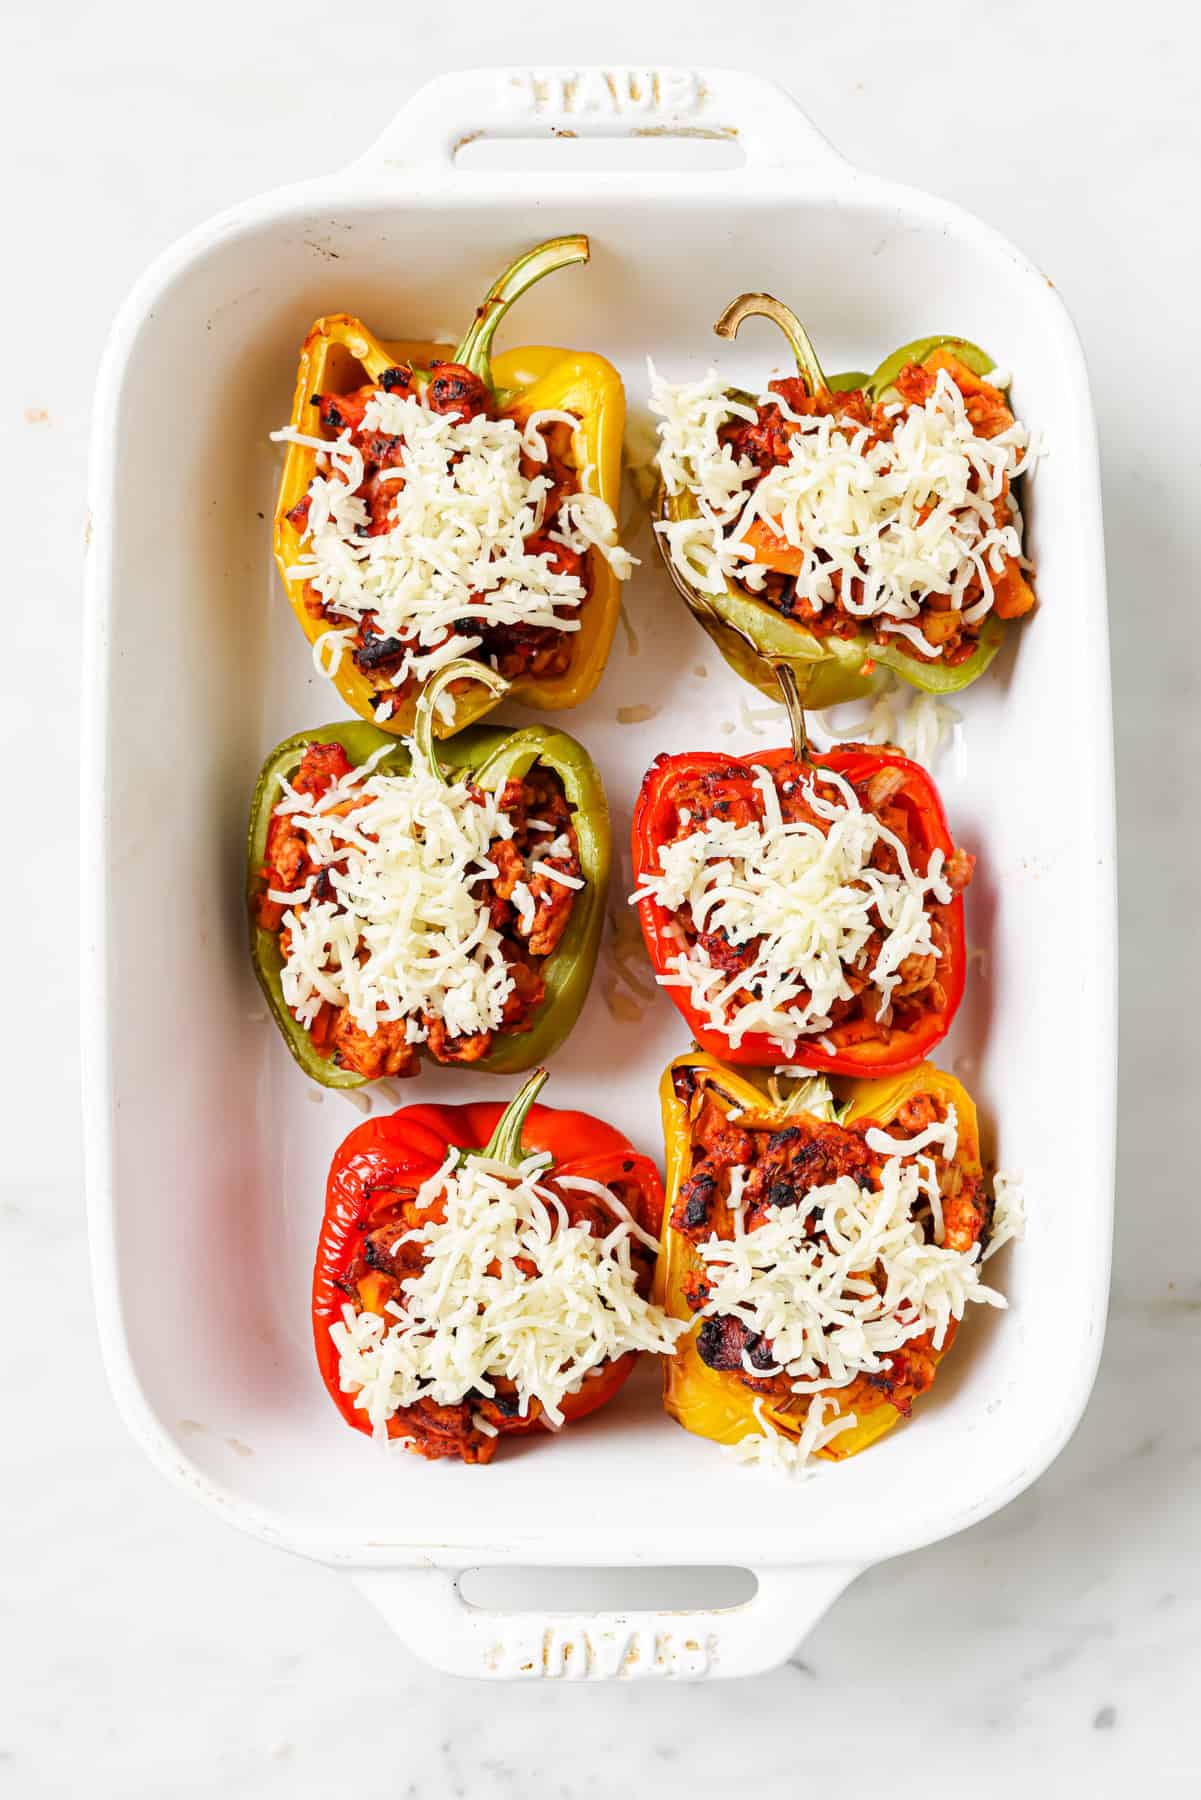 Topping the peppers with cheese.